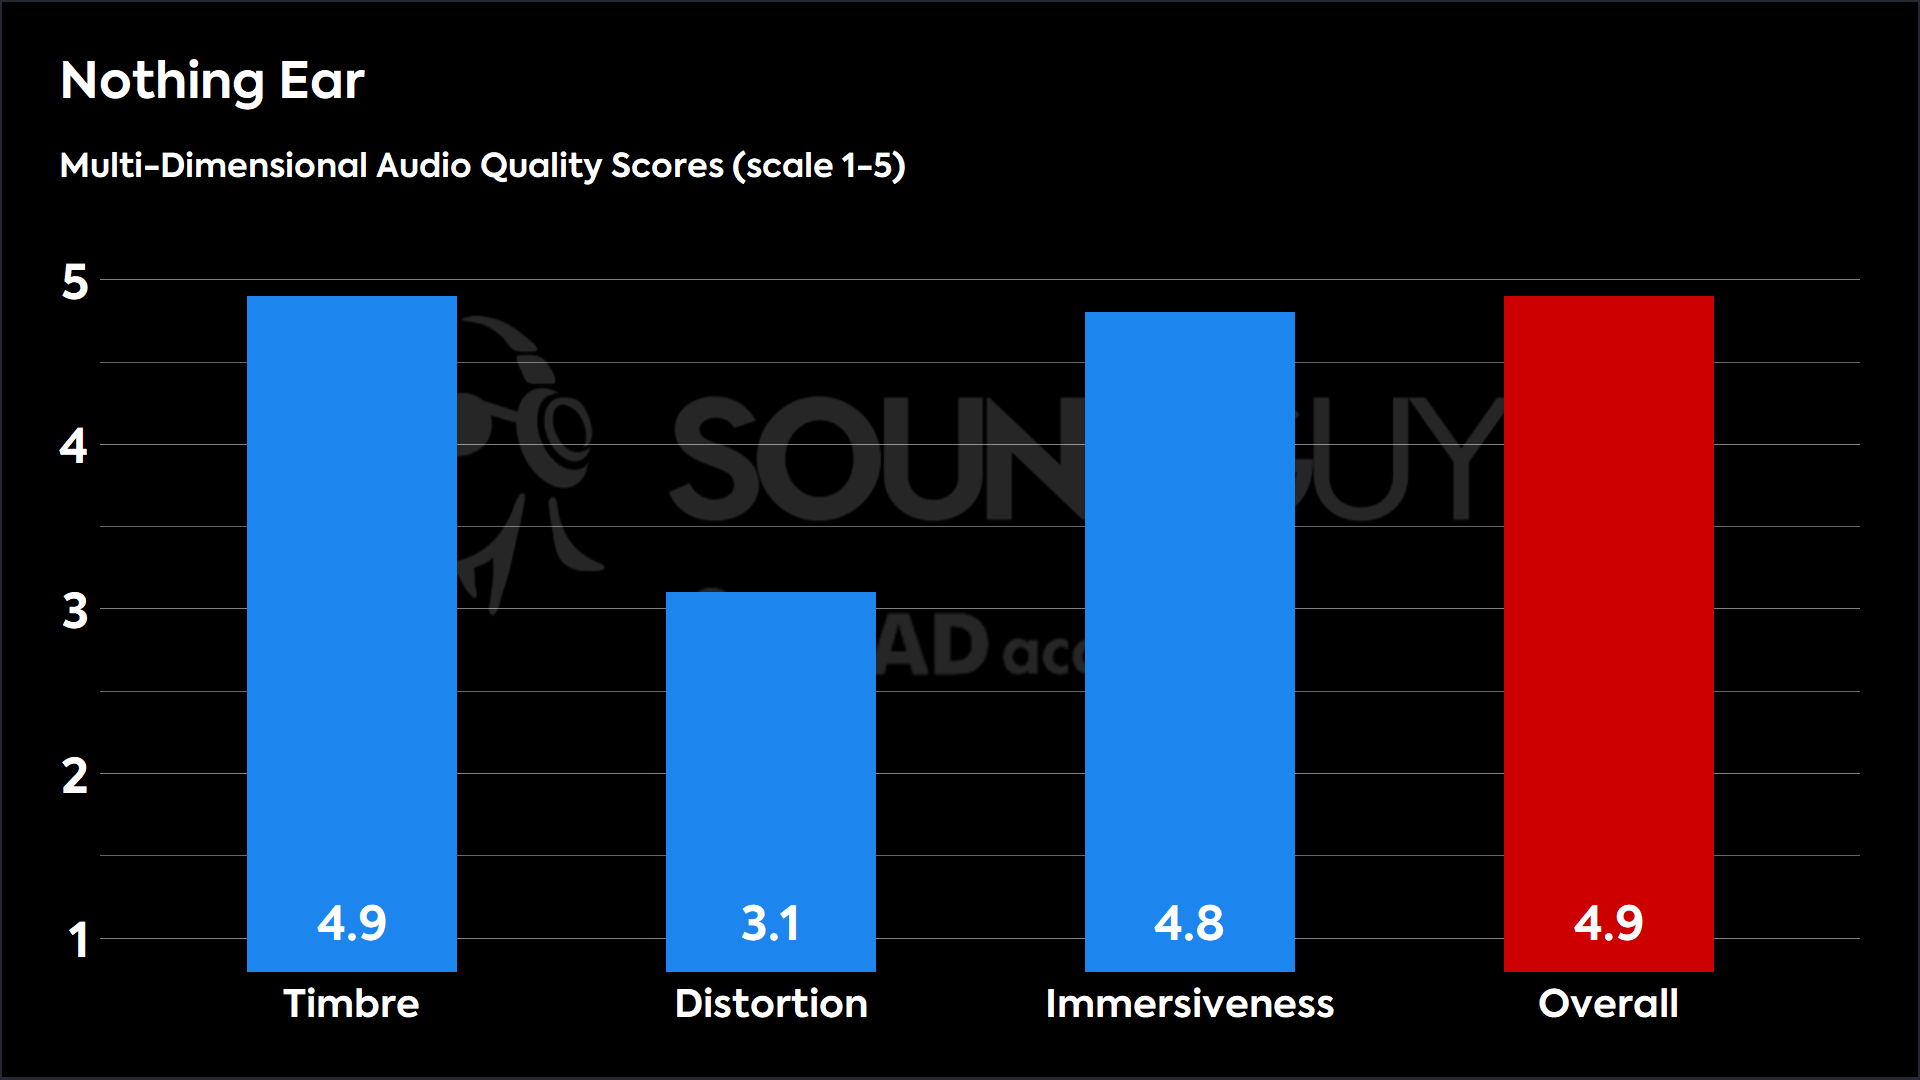 This chart shows the MDAQS results for the Nothing Ear in Default mode. The Timbre score is 4.9, The Distortion score is 3.1, the Immersiveness score is 4.8, and the Overall Score is 4.9).